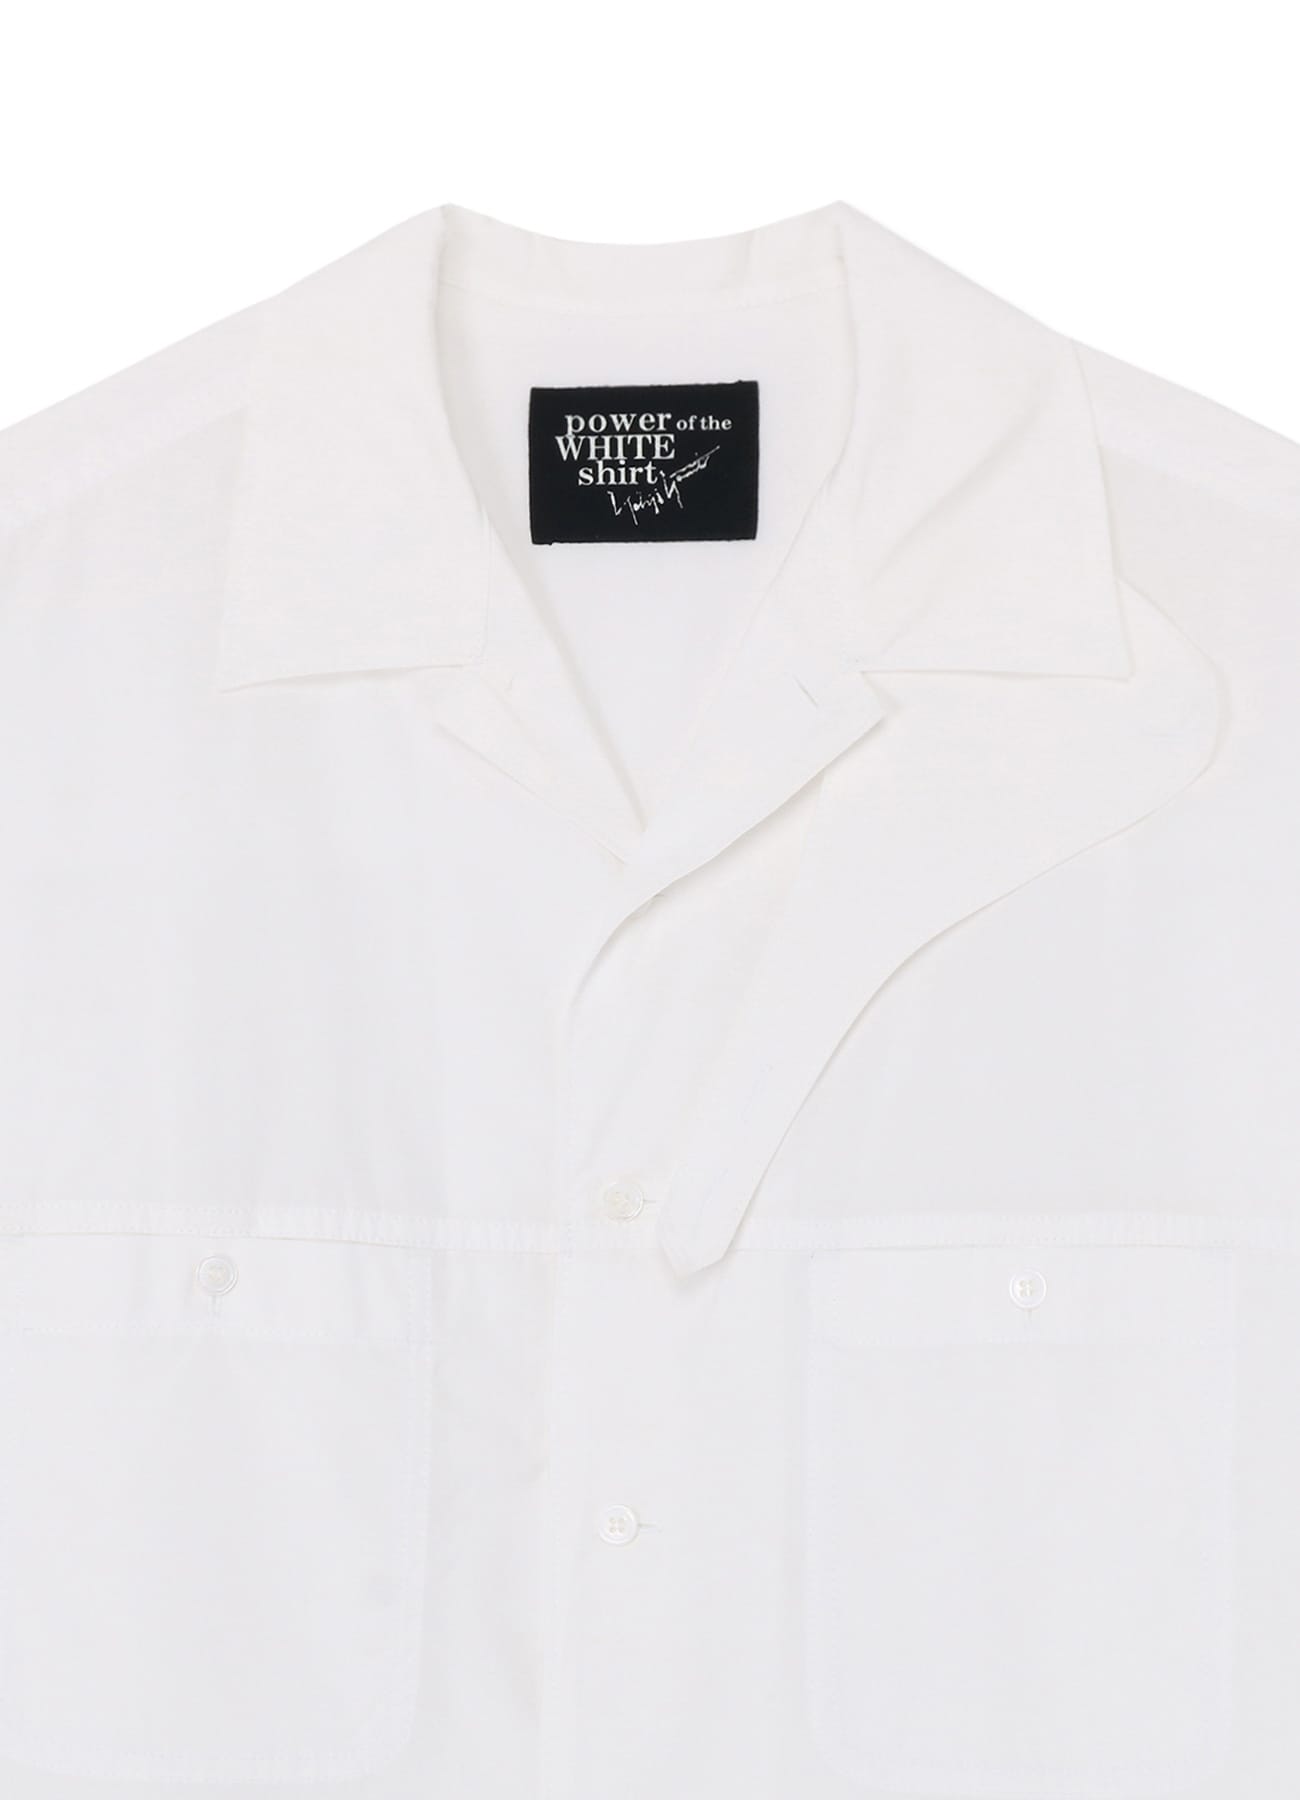 SHIRT WITH CHIN FLAP DETAIL(S White): power of the WHITE shirt 